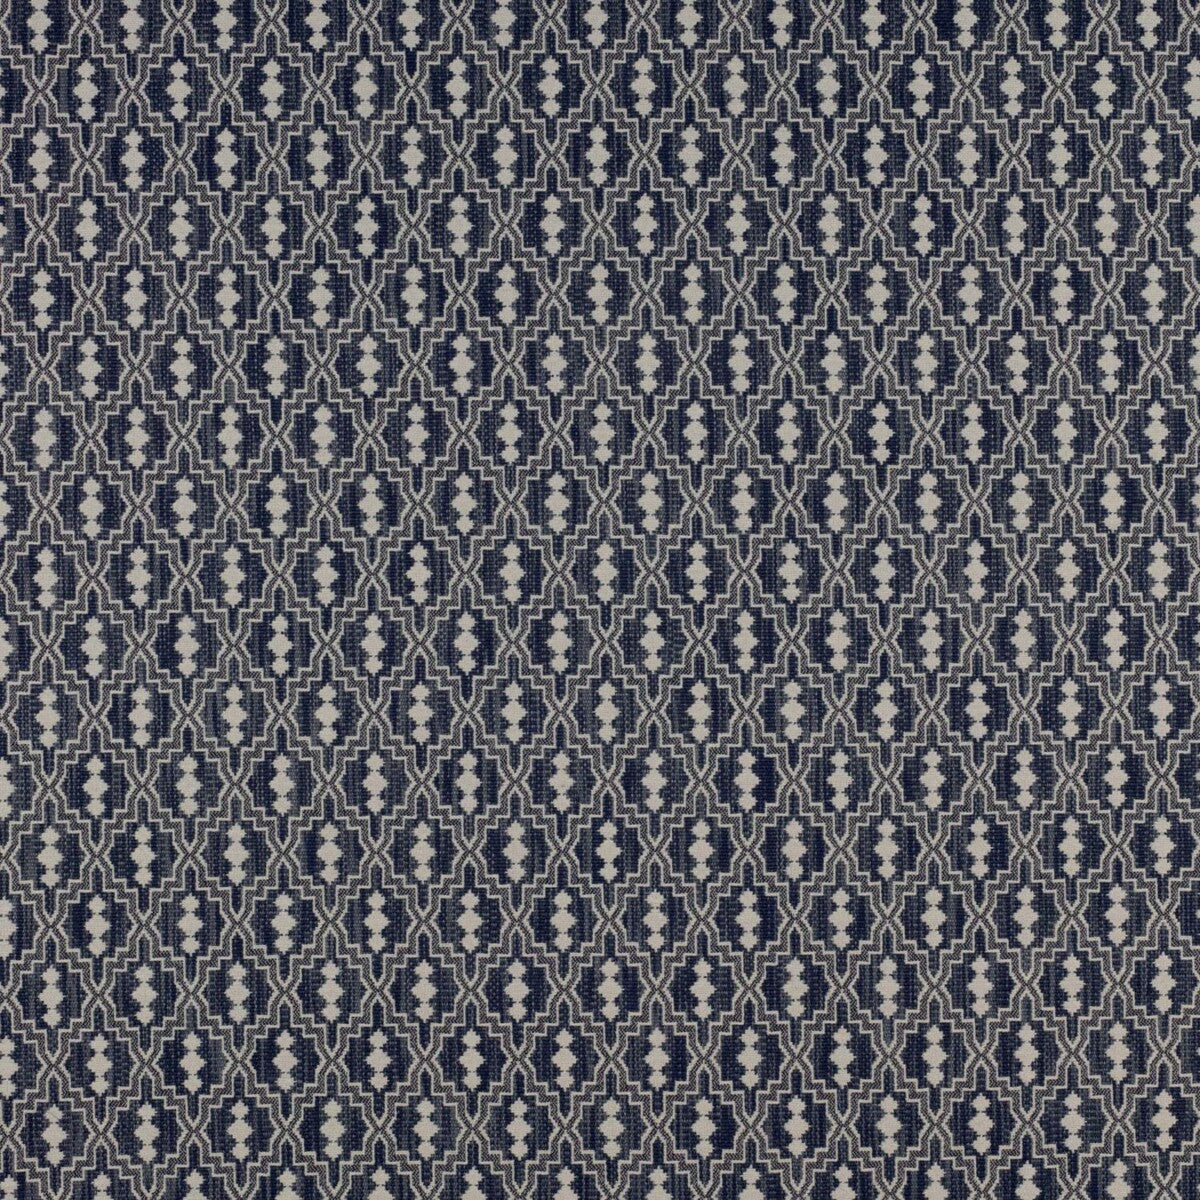 Aztec fabric in azul marino color - pattern GDT5152.006.0 - by Gaston y Daniela in the Gaston Uptown collection